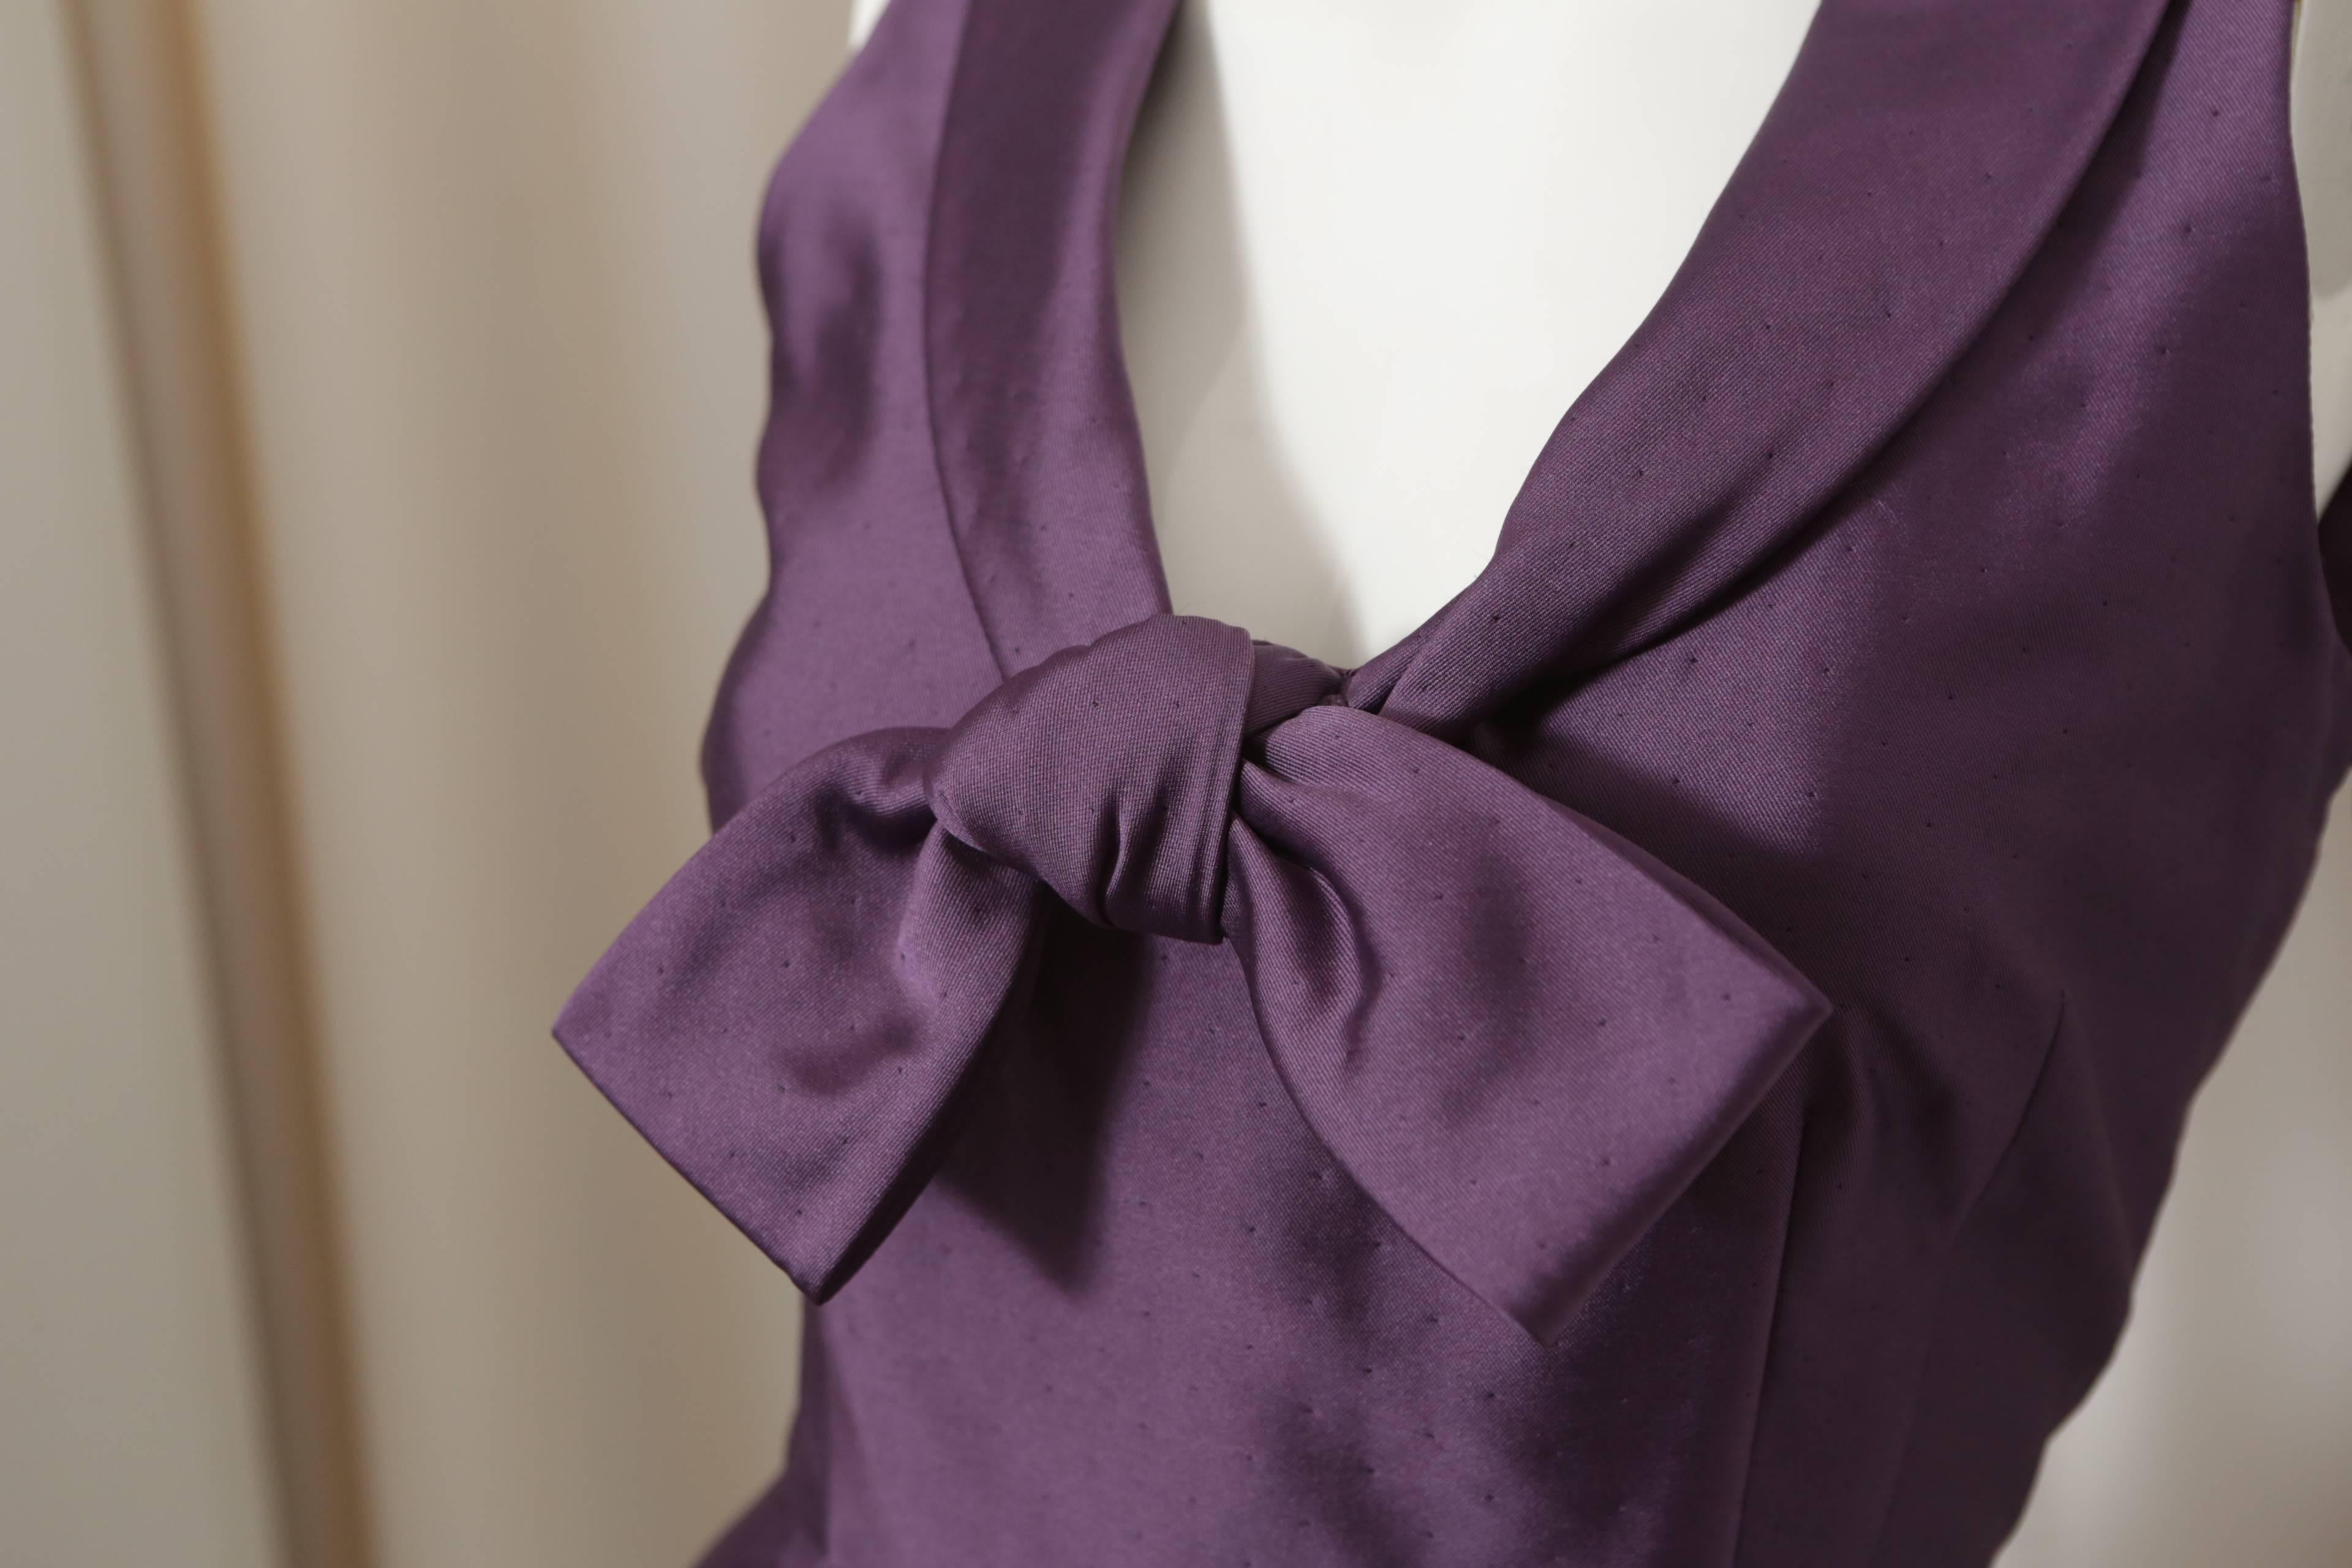 Valentino Roma purple s/l cocktail dress w/ front tie, side zip & allover pindot pattern. 